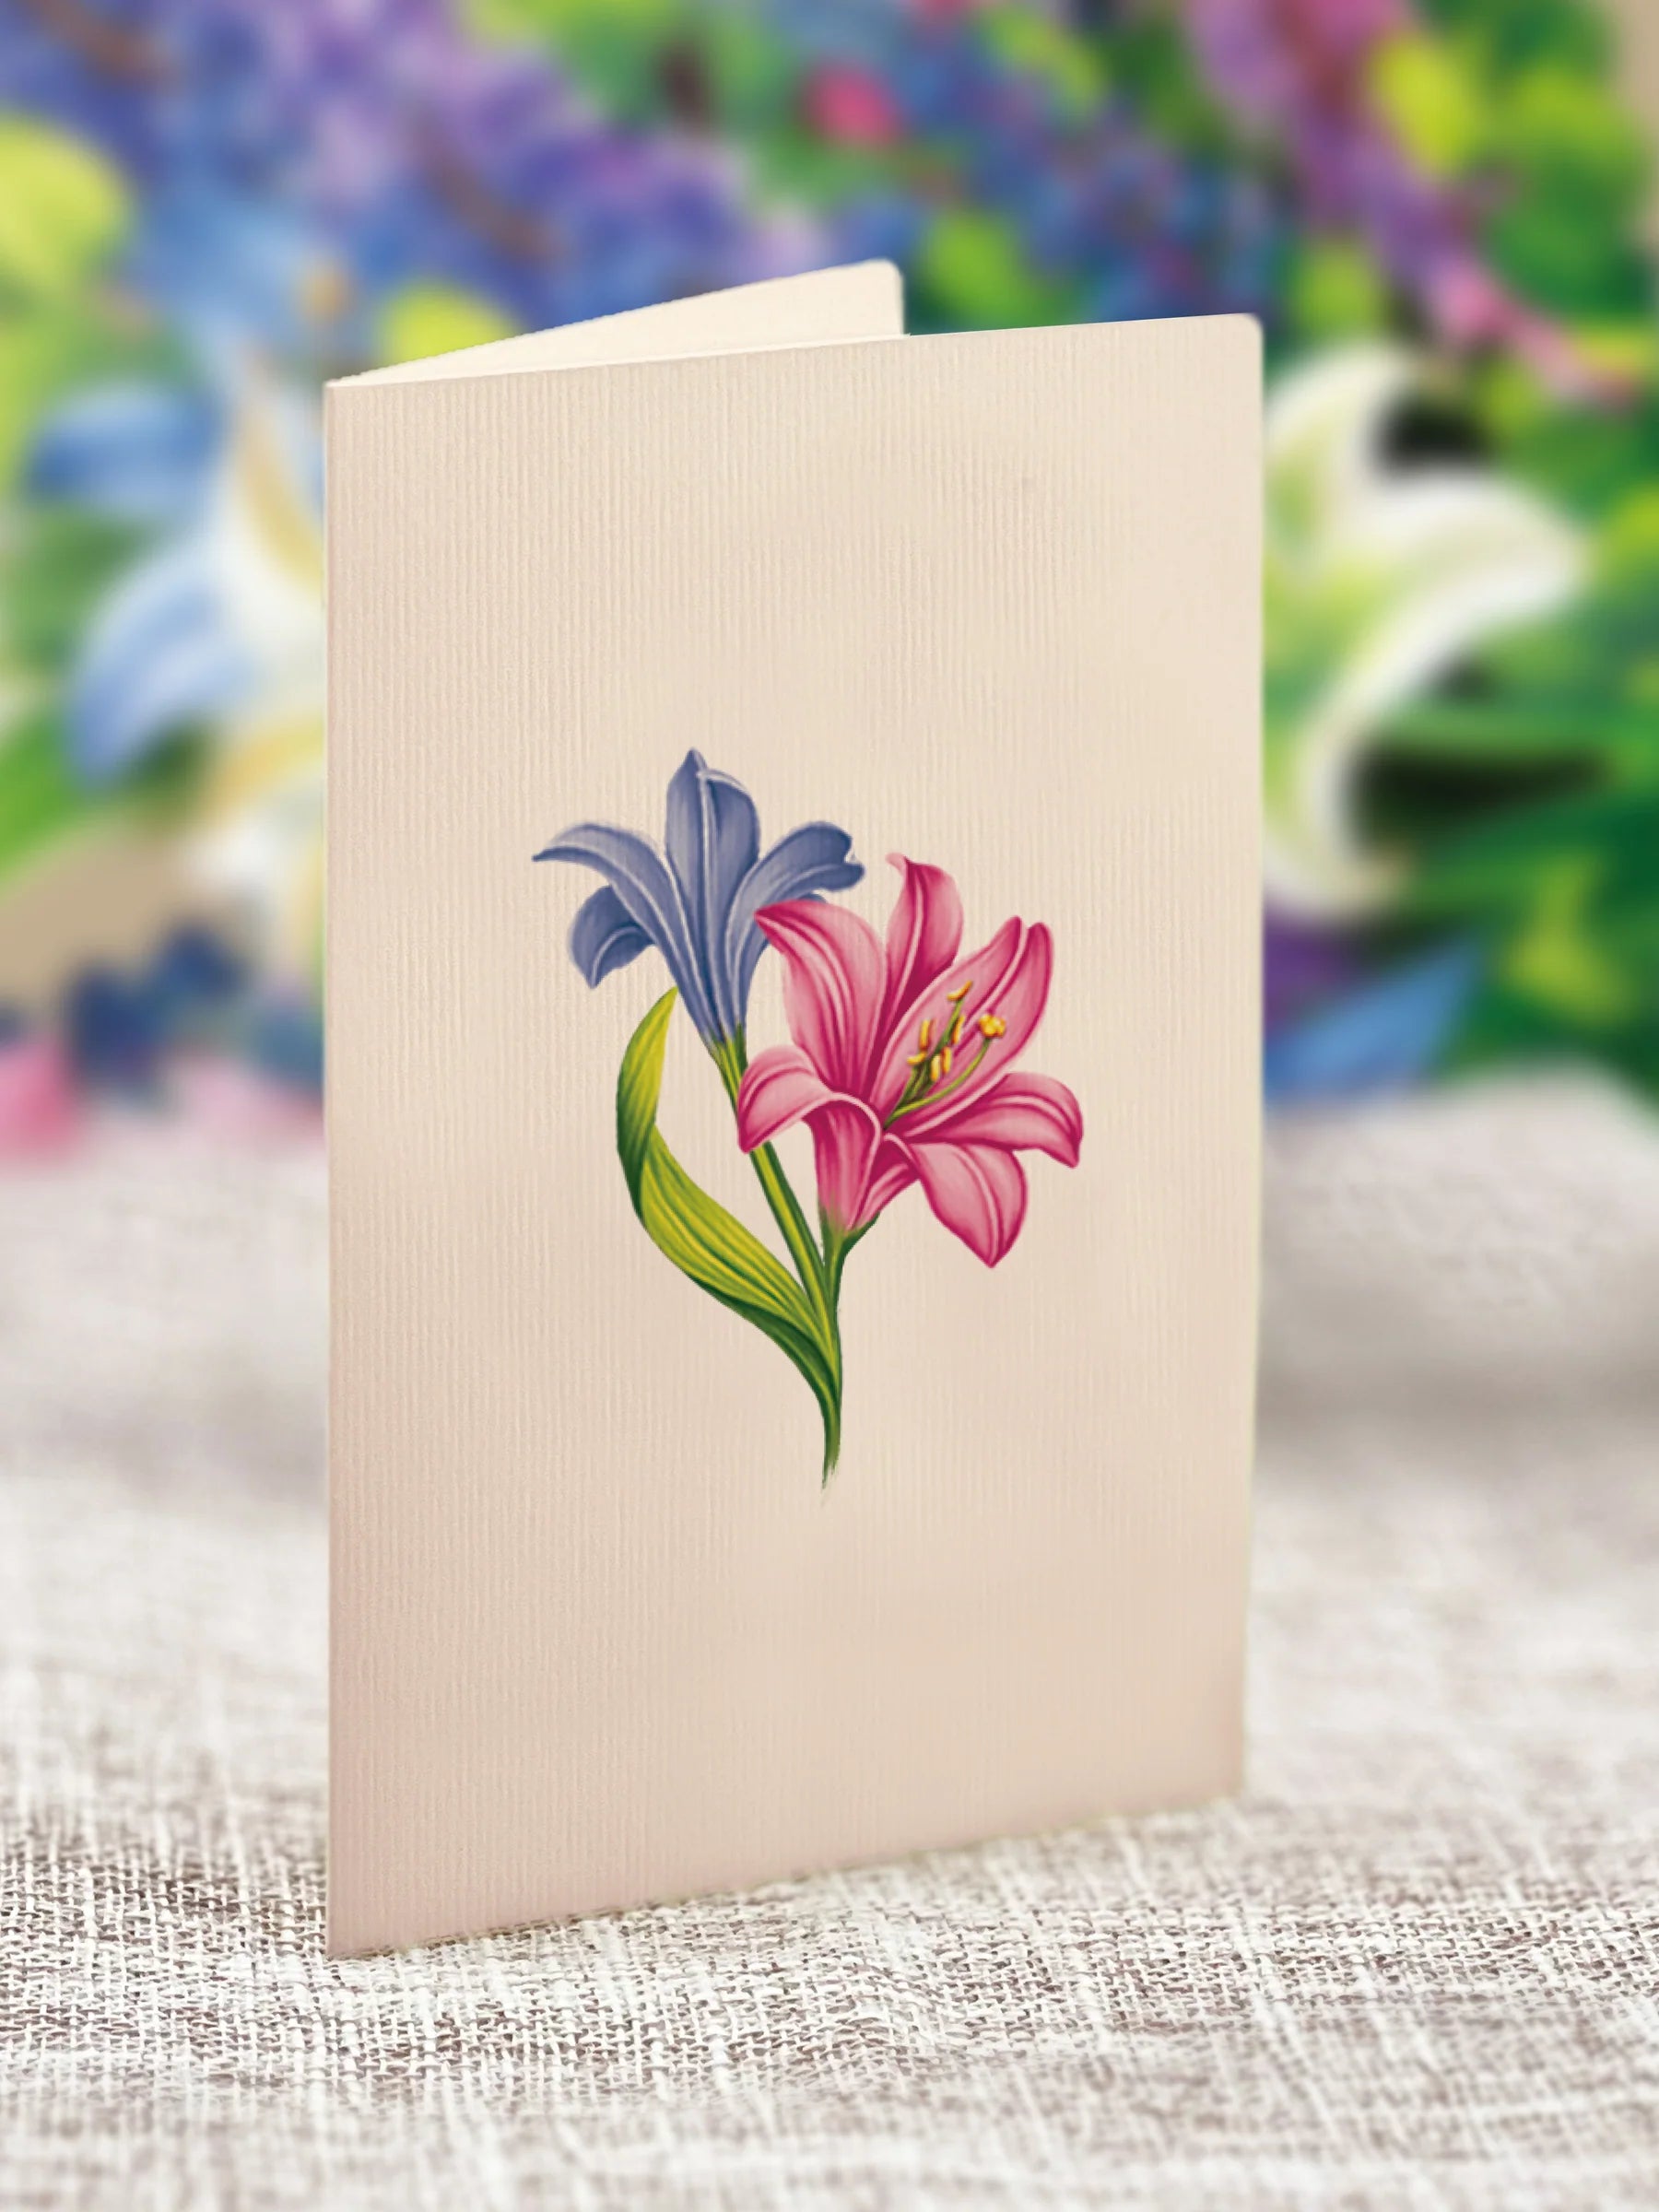 close-up of enclosure card with lilies printed on it.